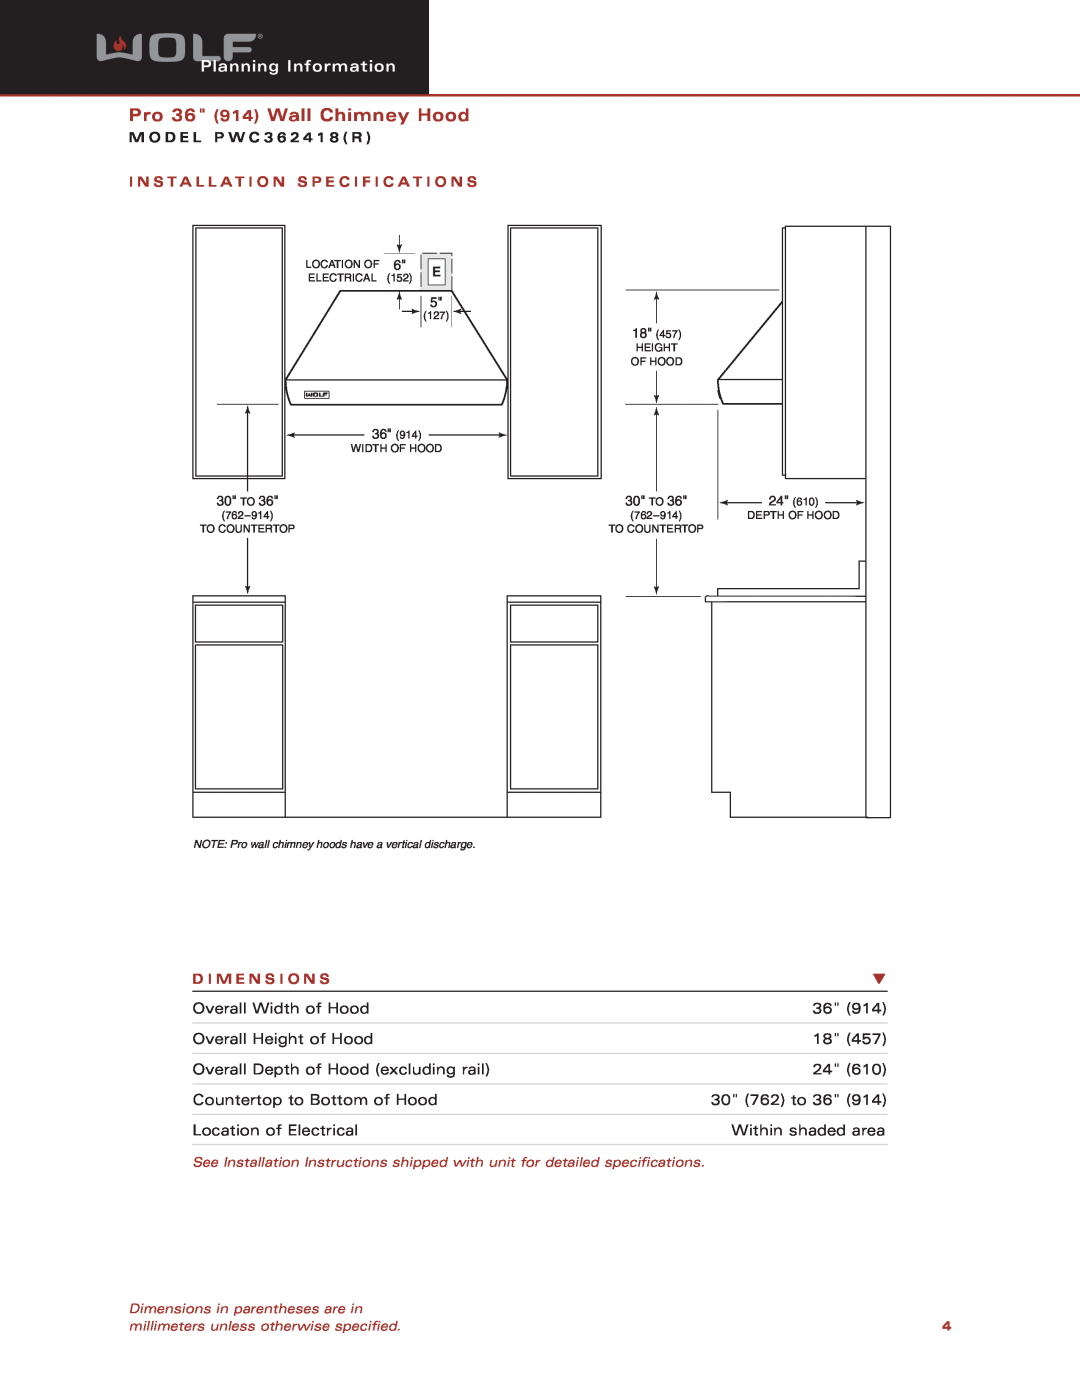 Wolf Appliance Company PWC362418 Pro 36 914 Wall Chimney Hood, Planning Information, M O D E L P W C 3 6 2 4 1 8 R, 30 TO 